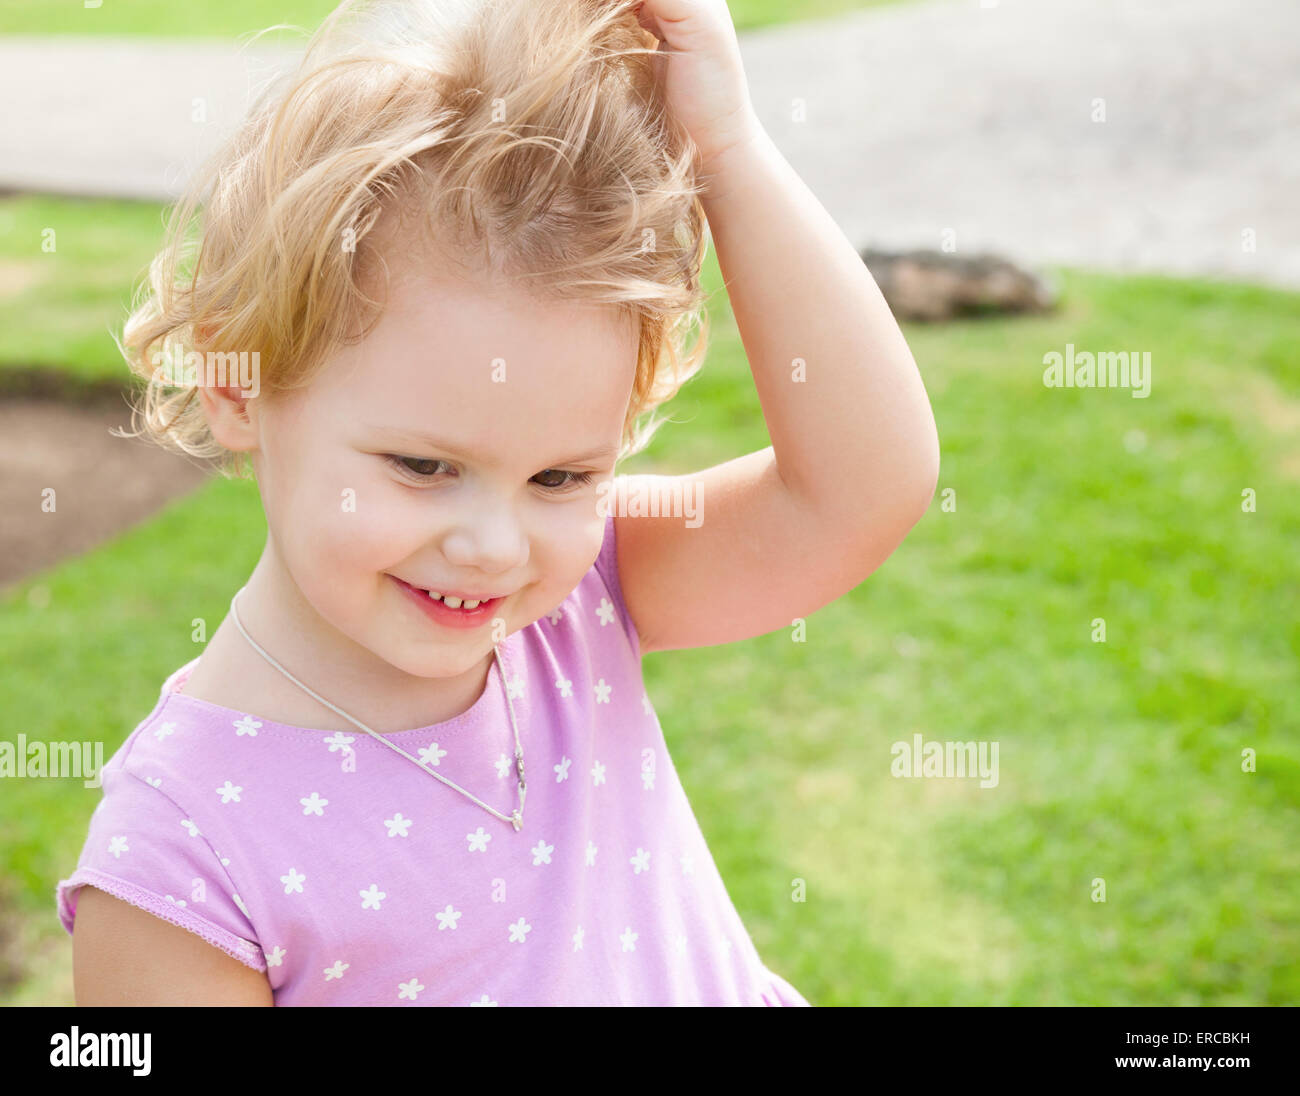 Outdoor summer portrait of cute playful smiling Caucasian blond baby girl in a park Stock Photo